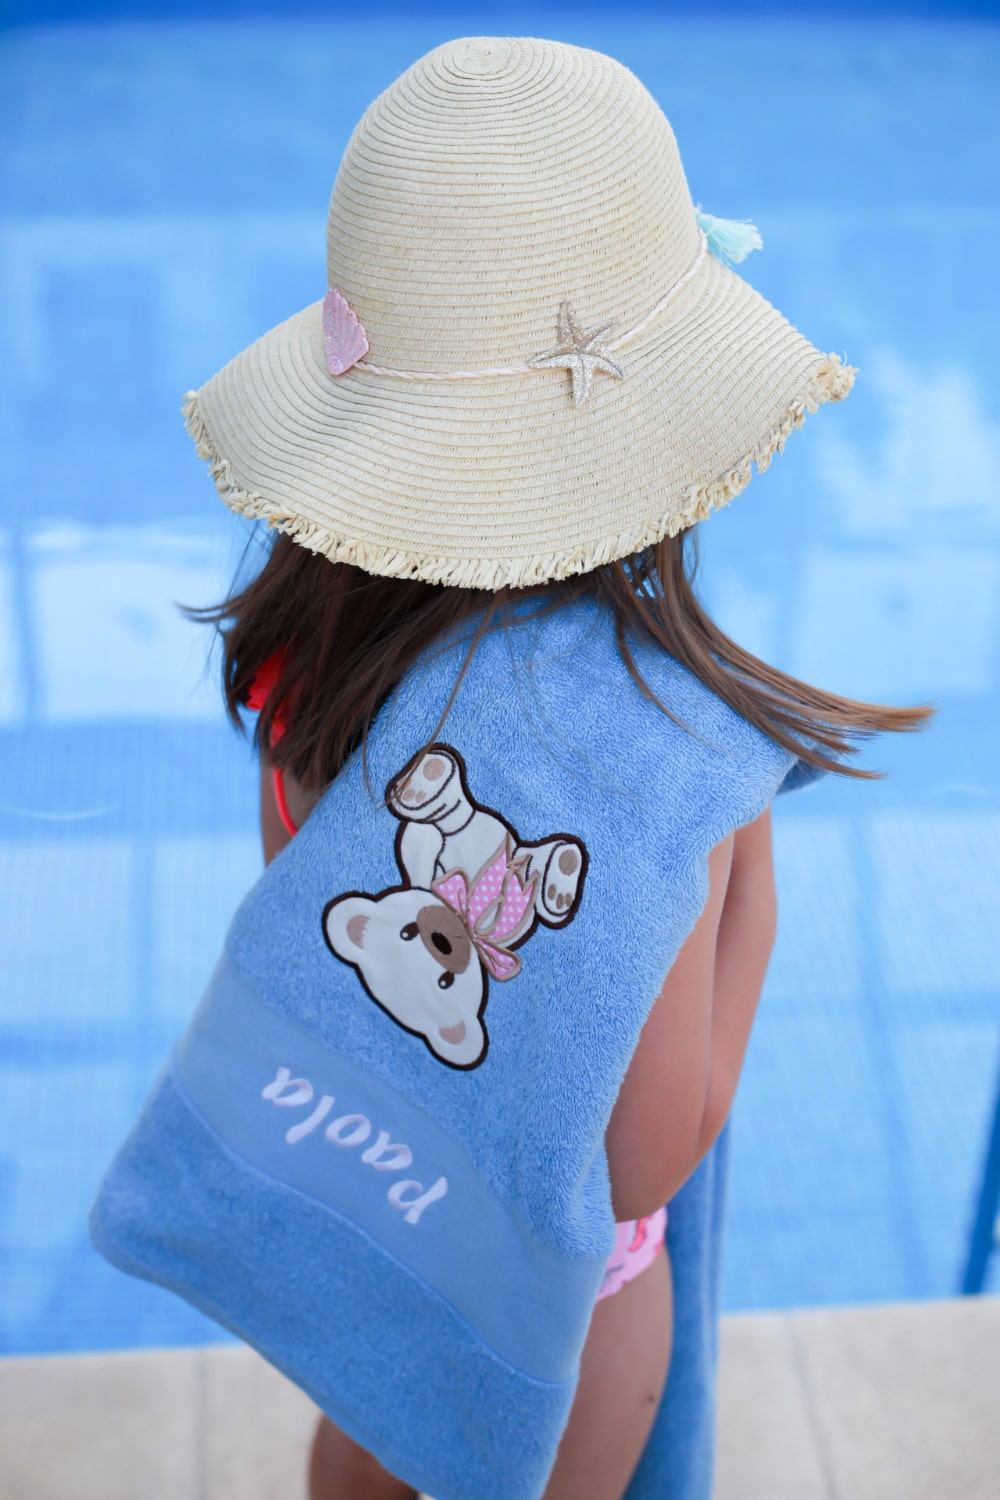 The little girl proudly shows off her personalized towel, with a vibrant design and her name on it.